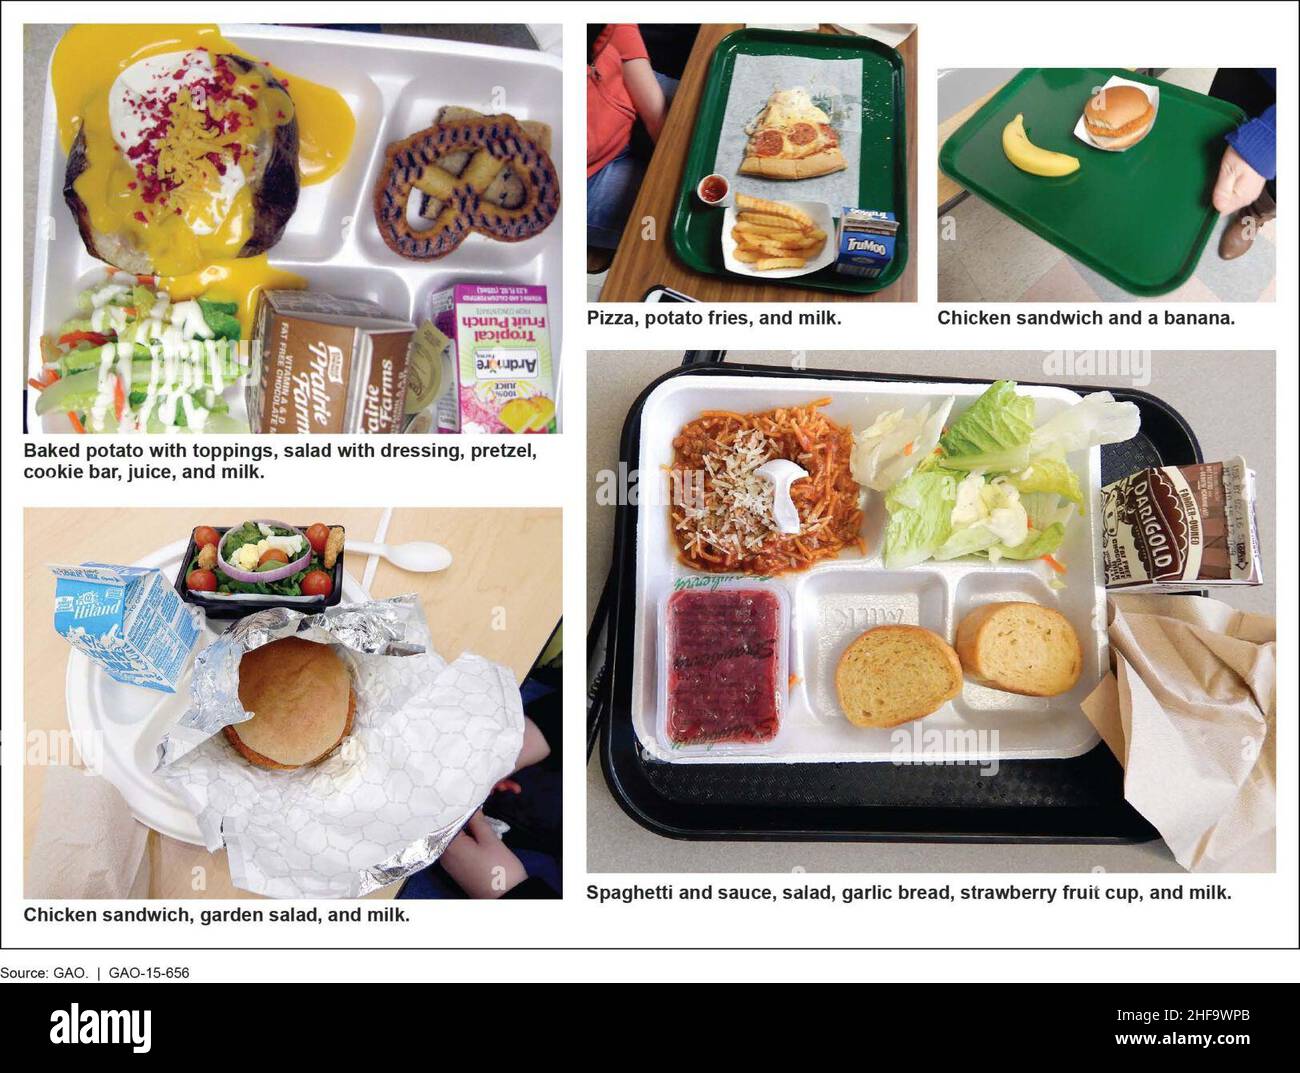 School Nutrition - Lunches Provided Pursuant to the New Content and Nutrition Requirements. Stock Photo